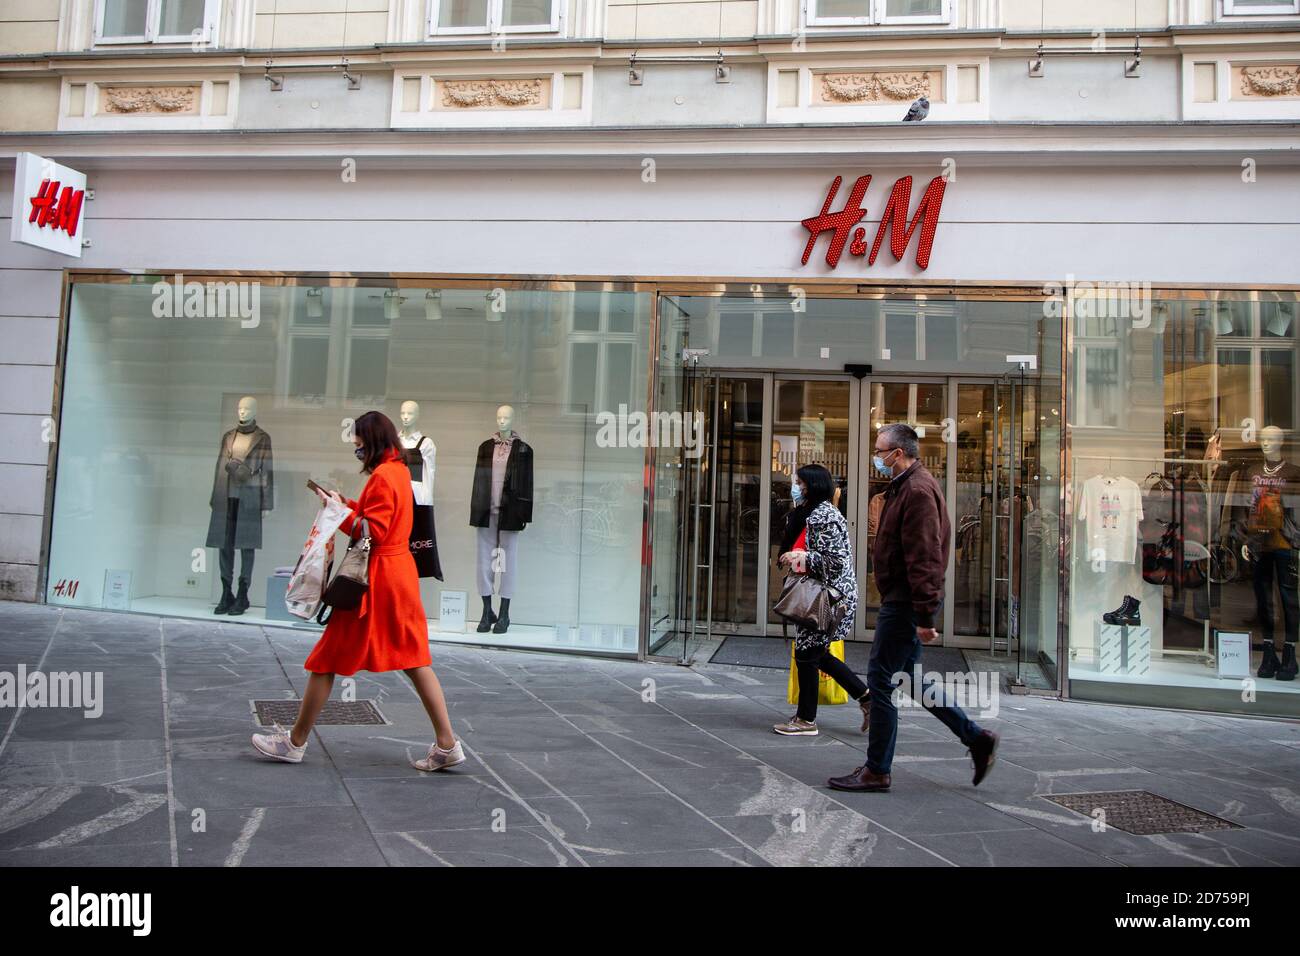 https://c8.alamy.com/comp/2D759PJ/people-wearing-face-masks-walk-past-the-swedish-multinational-clothing-retail-company-hm-store-in-ljubljana-after-slovenia-redeclared-an-epidemicas-daily-new-covid-19-cases-passed-twenty-percent-of-all-tested-slovenia-declared-a-30-day-epidemic-starting-monday-october-19-ordered-bars-and-restaurants-to-close-nationwide-implemented-a-curfew-and-obligatory-wearing-of-masks-in-public-and-indoors-fitness-clubs-closed-beauty-and-hair-salons-can-accommodate-only-one-customer-and-gatherings-are-limited-to-six-persons-2D759PJ.jpg